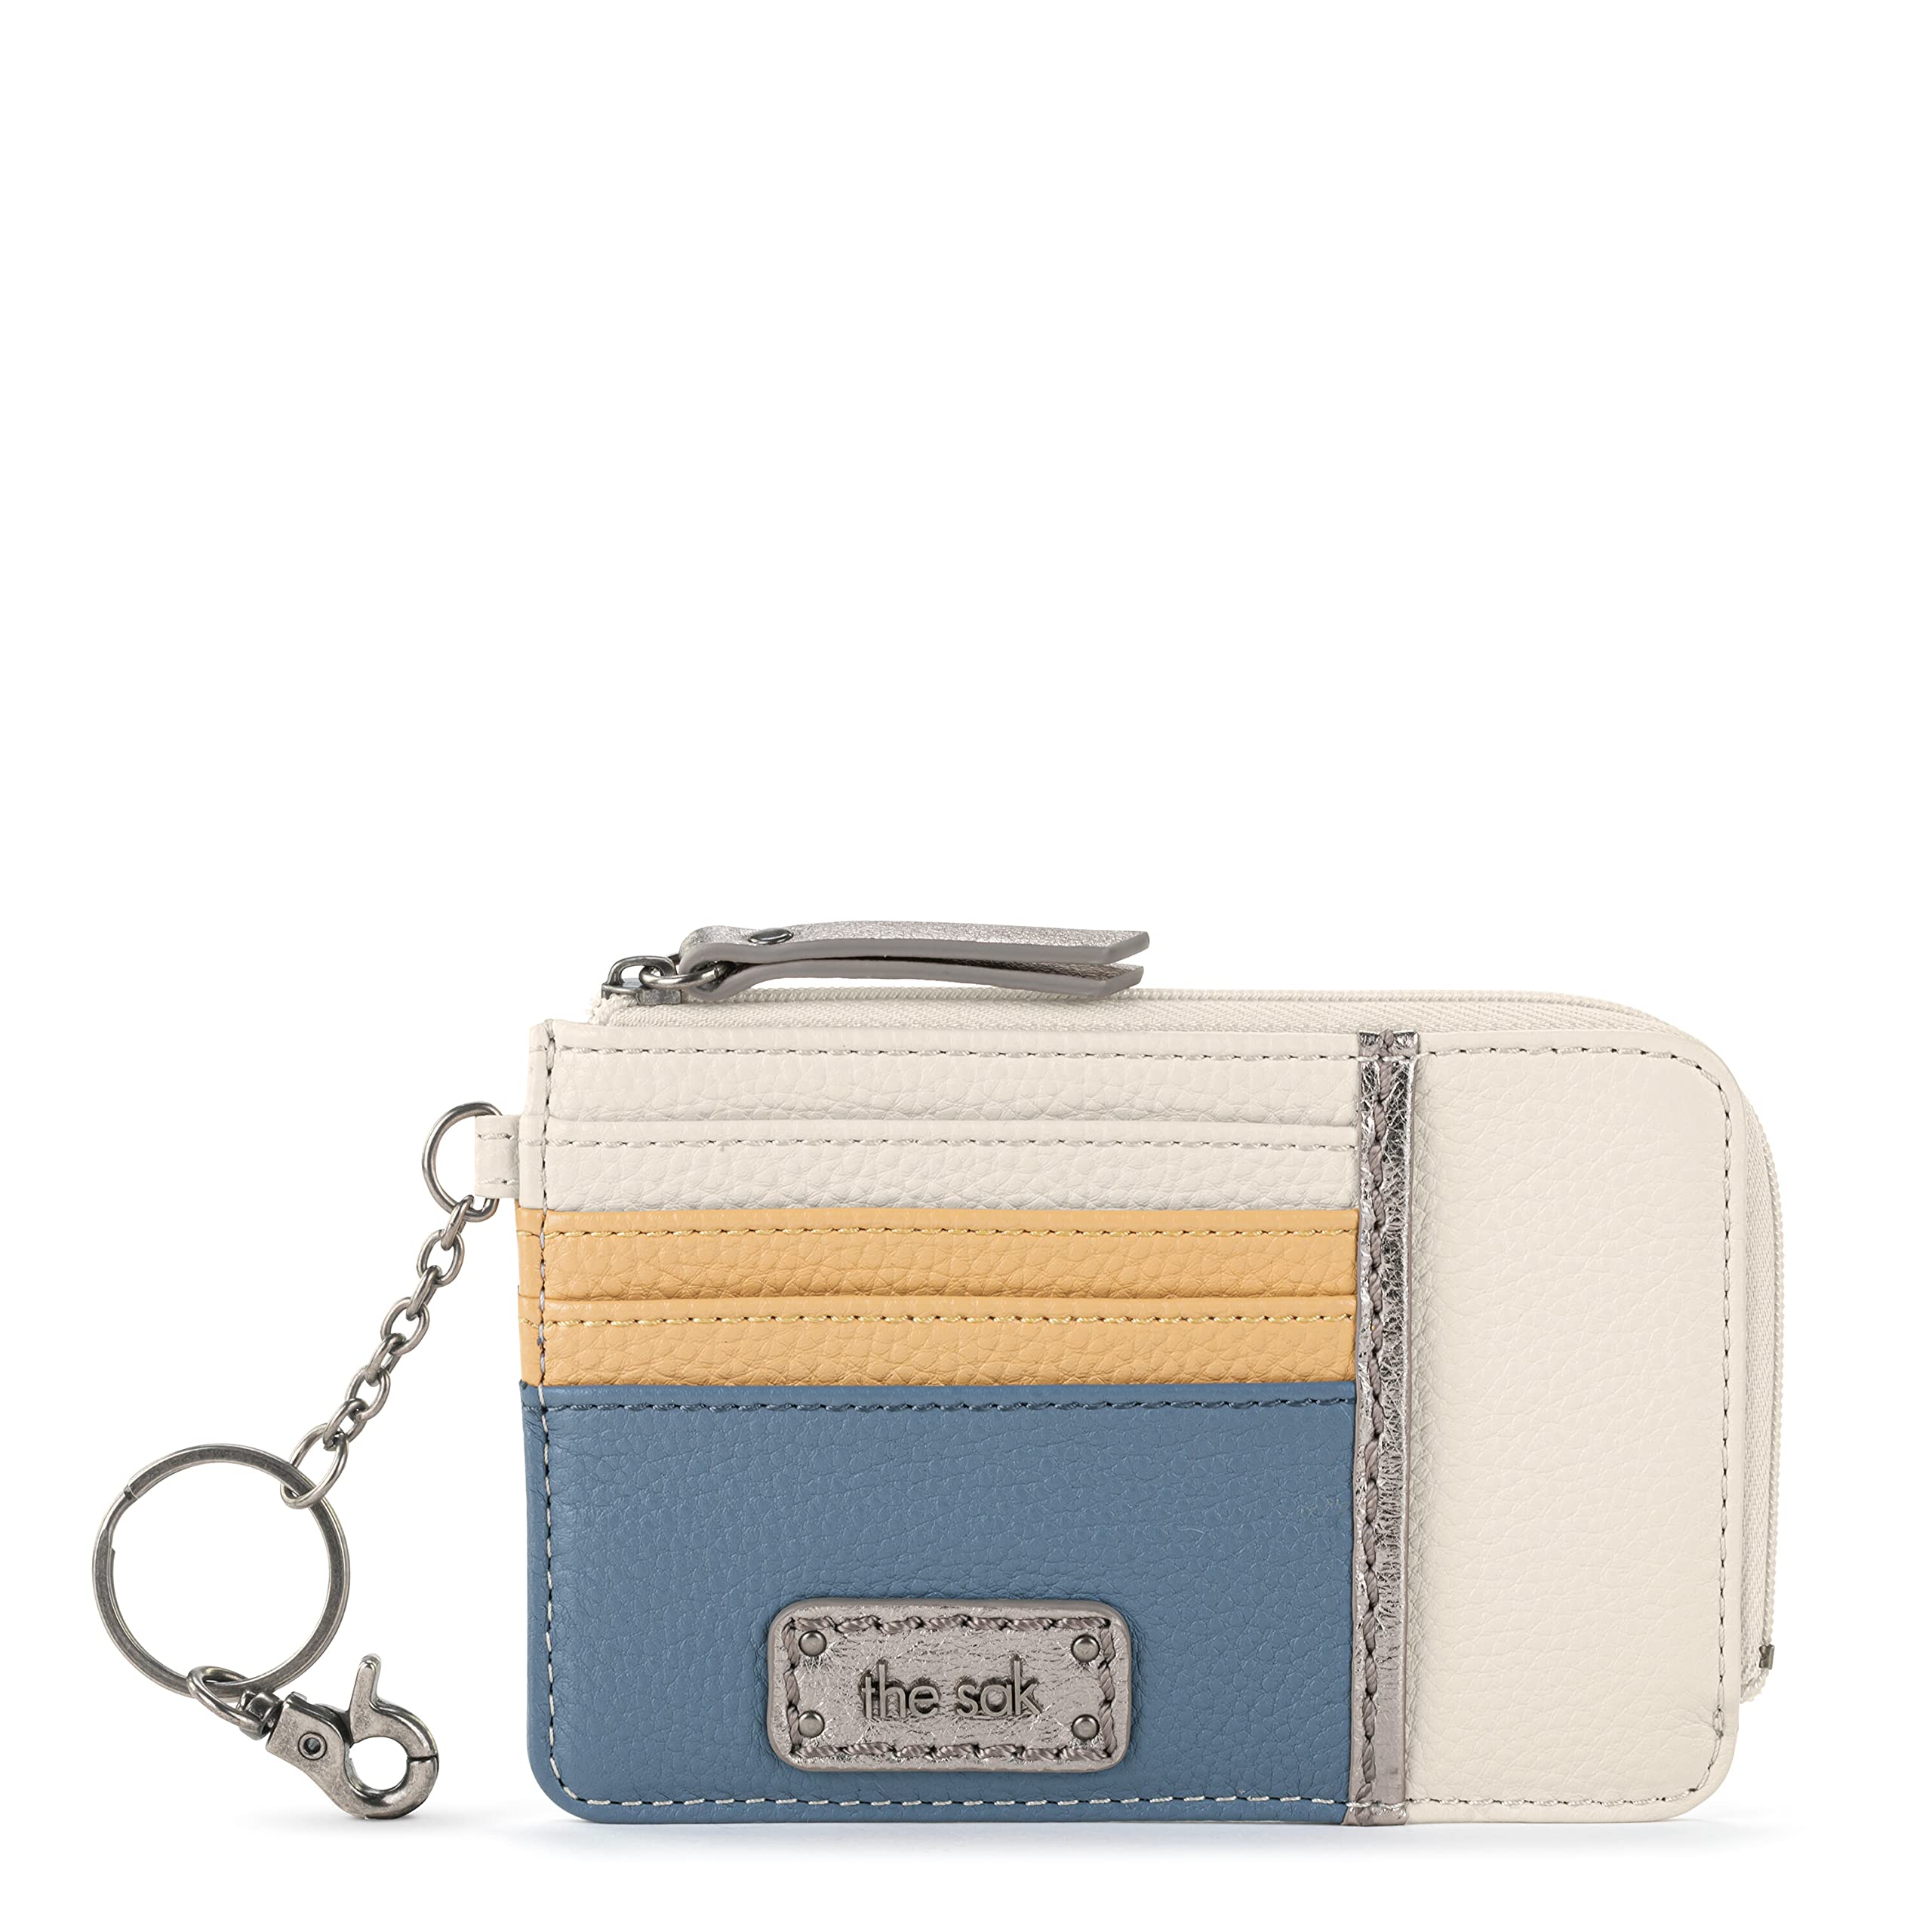 The Sak Iris Wallet in Leather, Elevated Card Holder with Keychain